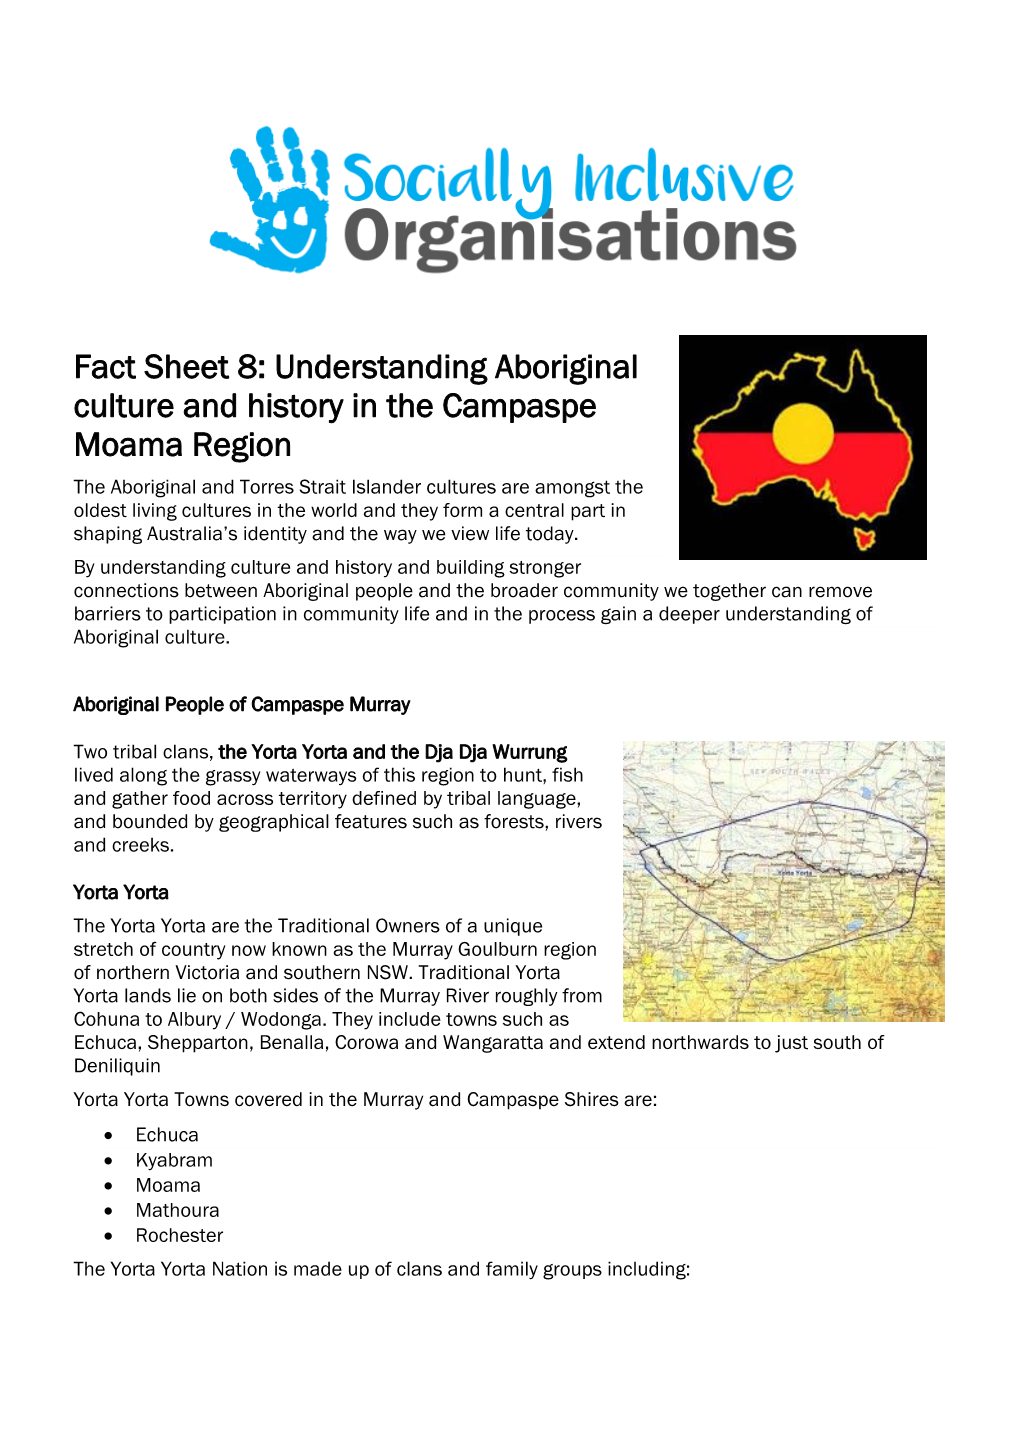 Fact Sheet 8: Understanding Aboriginal Culture and History in The